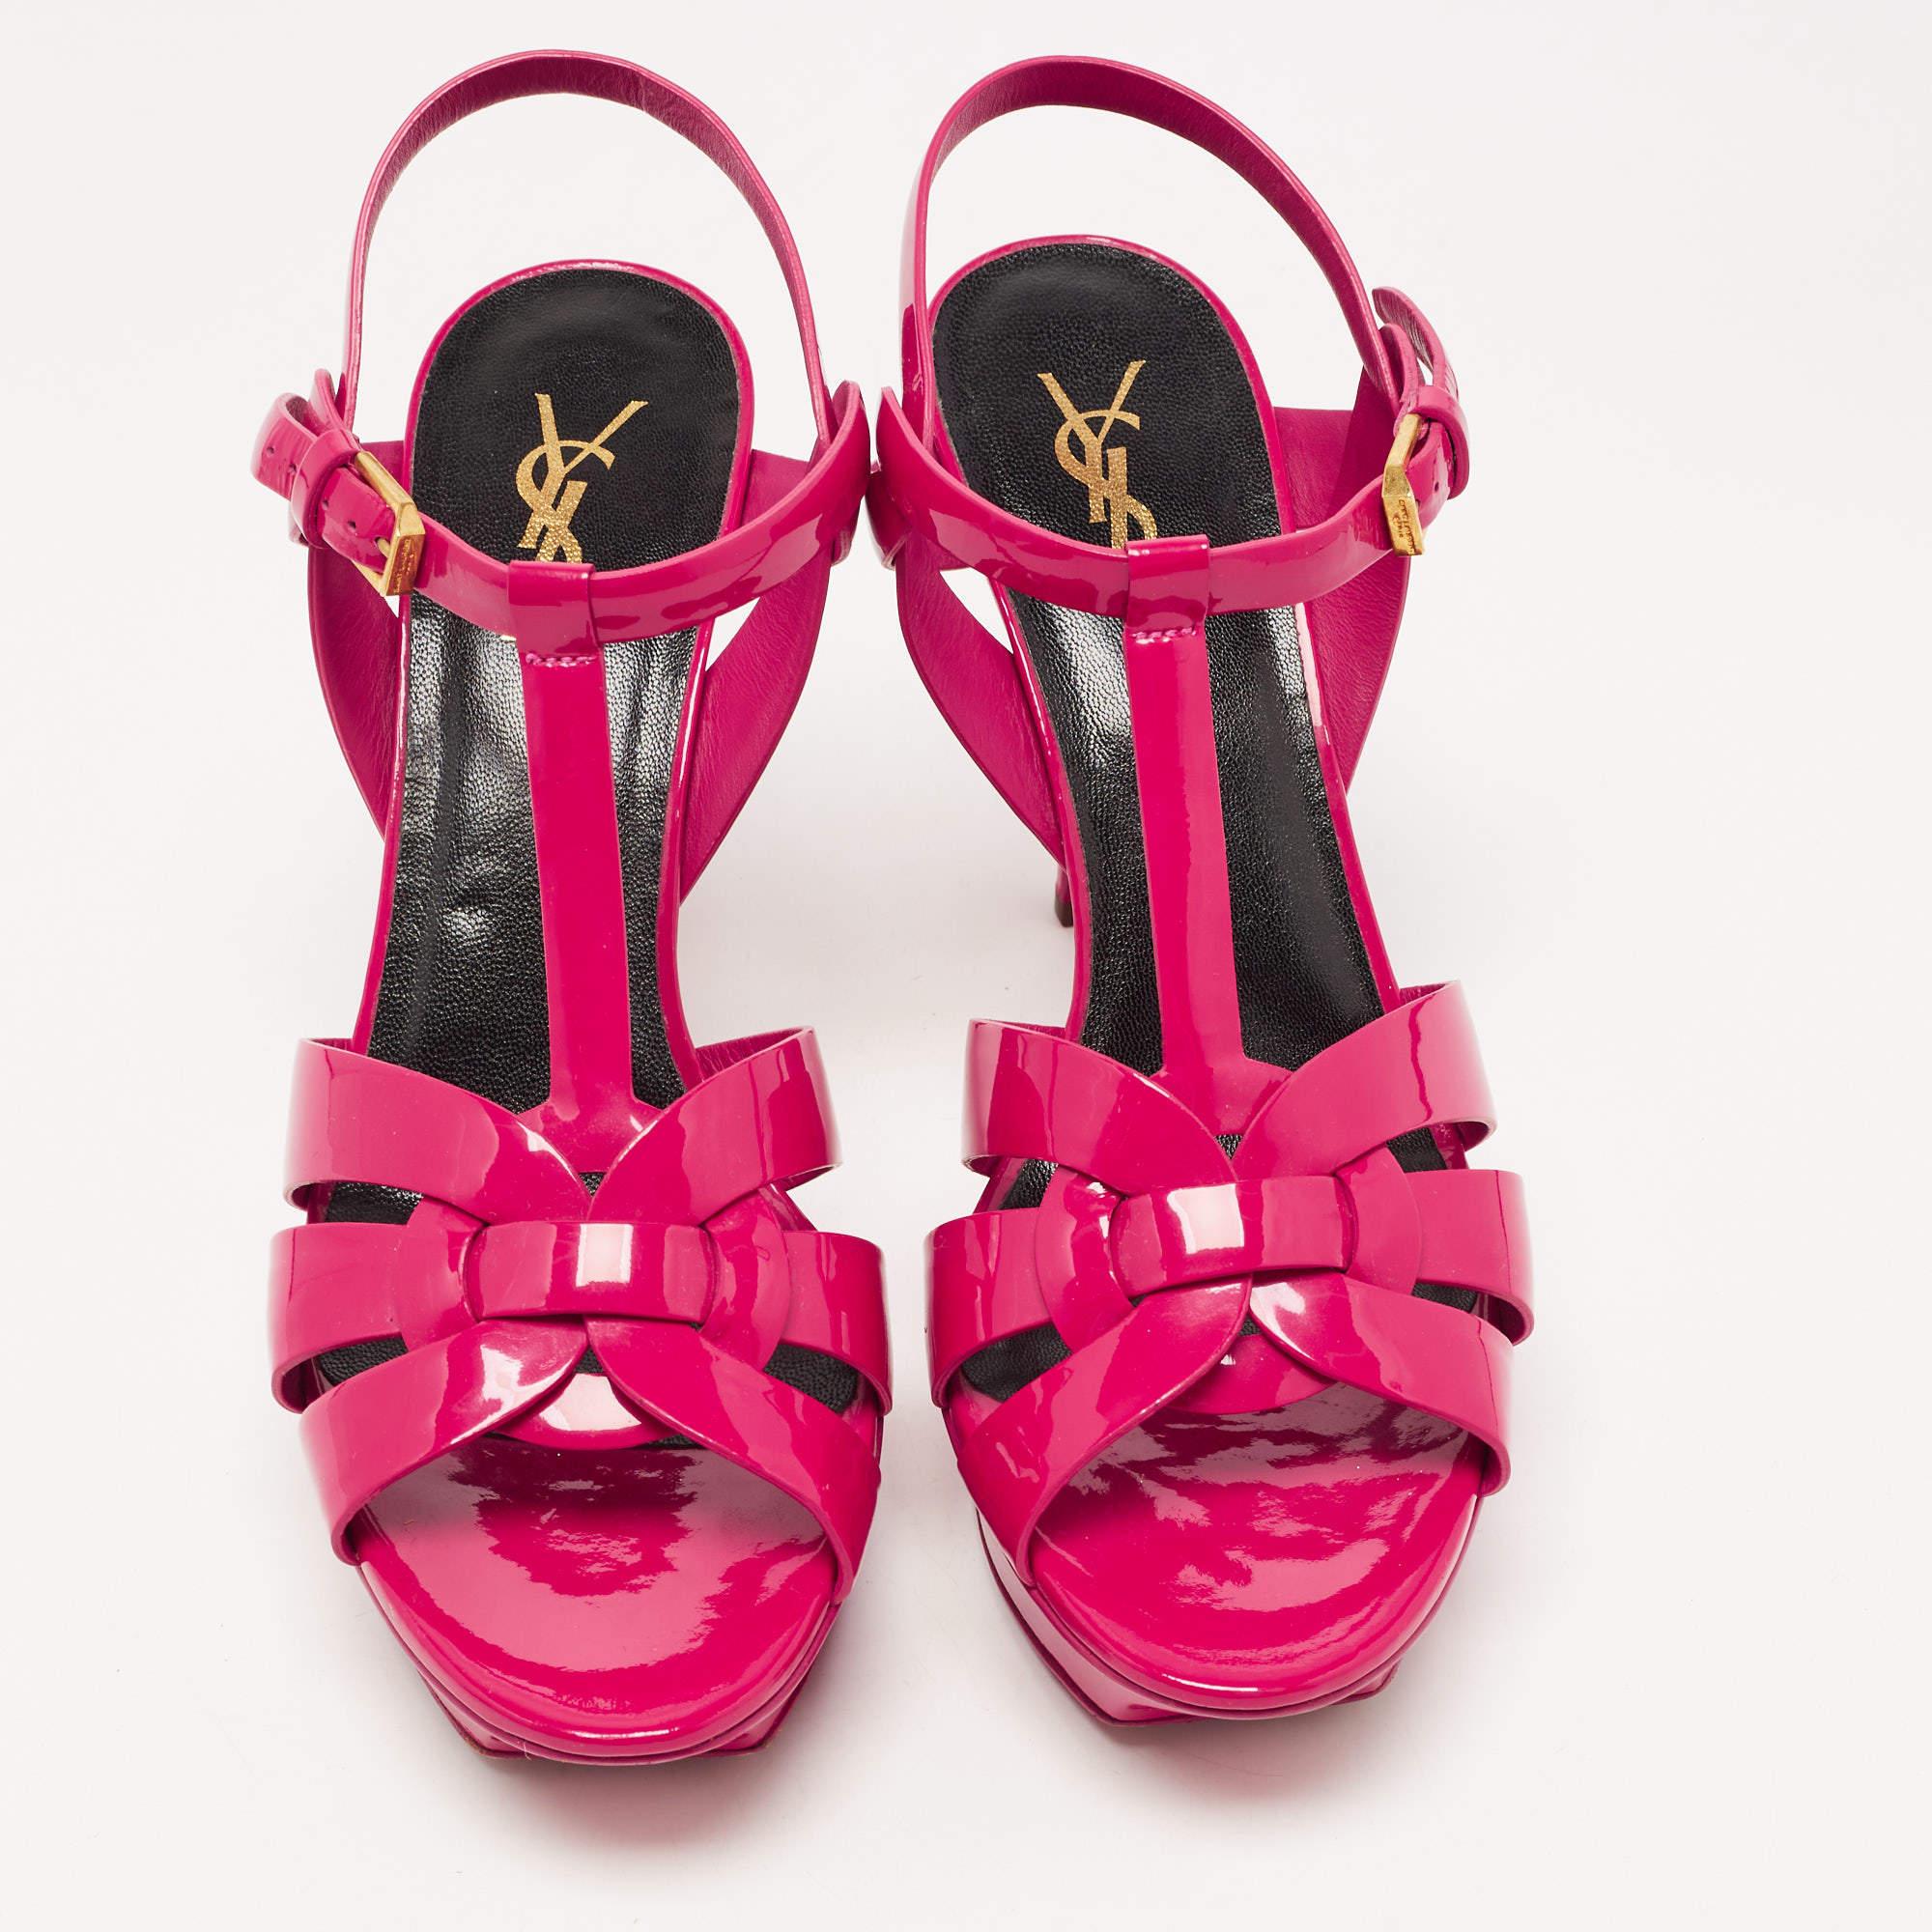 Complement your well-put-together outfit with these Saunt Laurent pink shoes. Timeless and classy, they have an amazing construction for enduring quality and comfortable fit.

